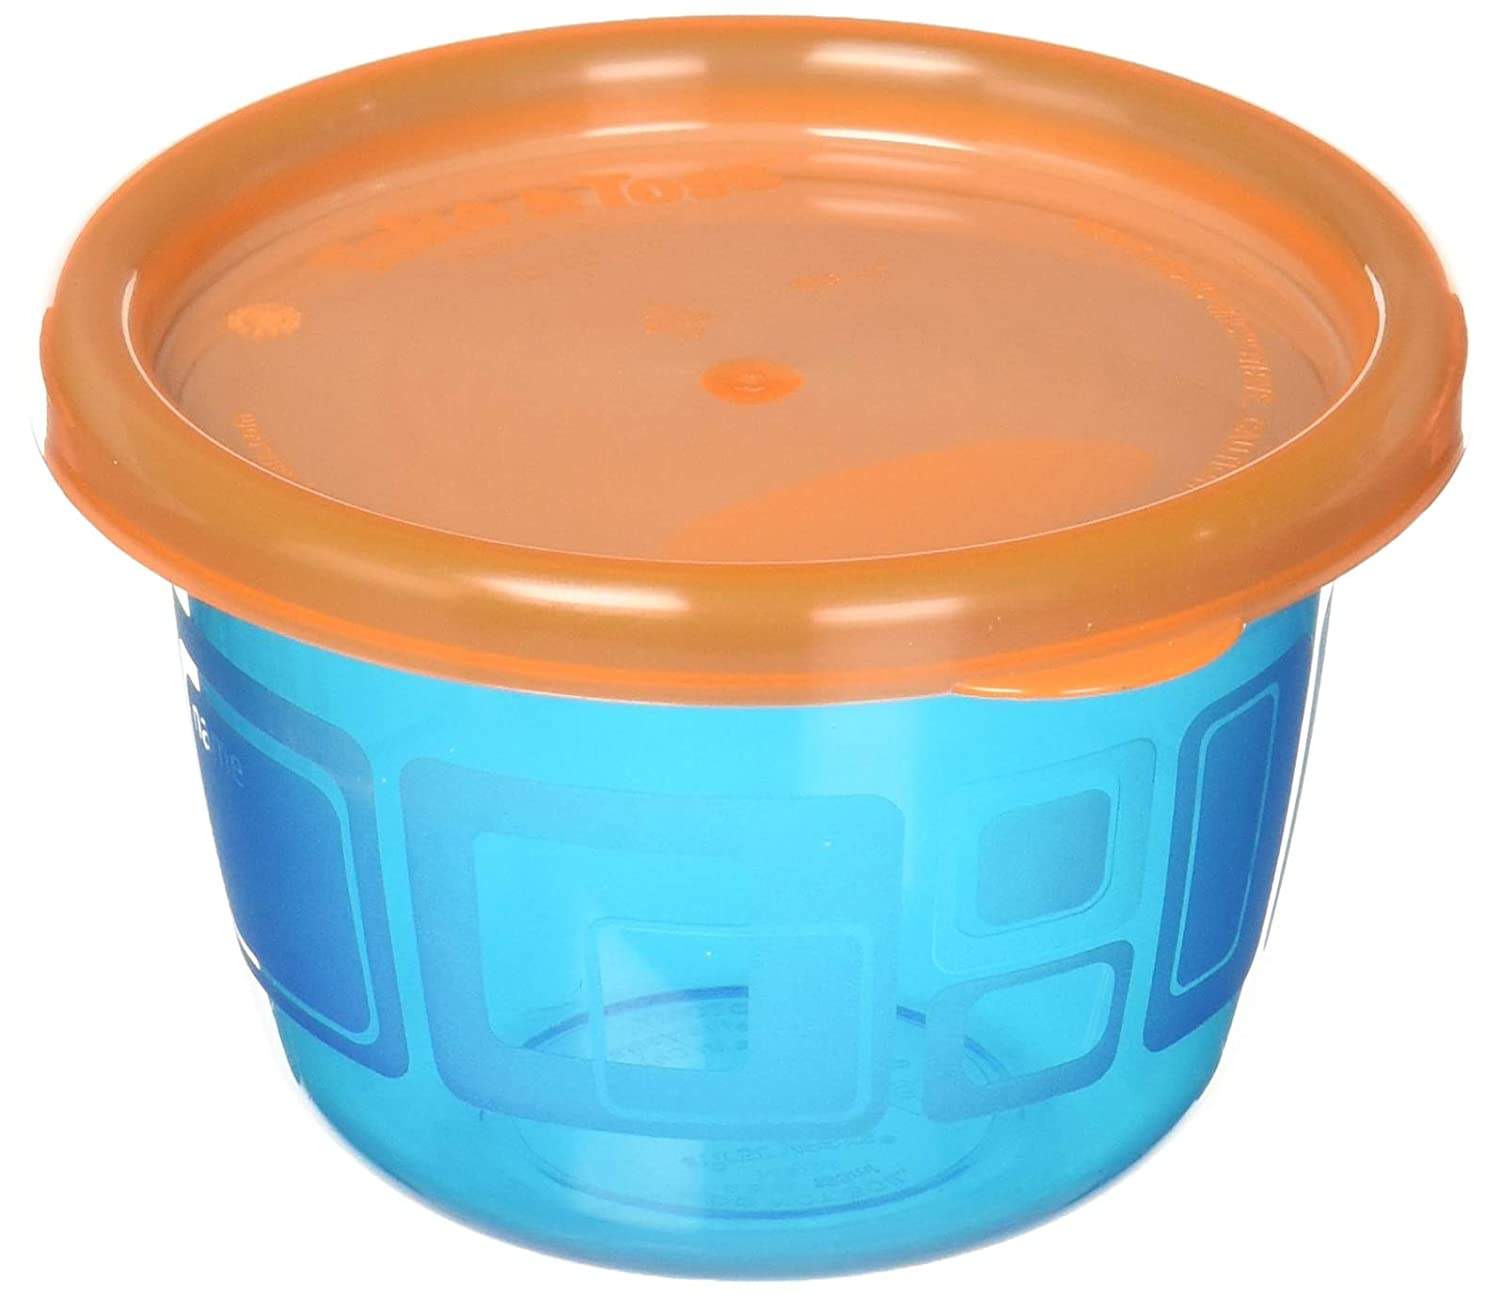 The First Years Take & Toss Bowls with Lids (Pack of 6) Bpa-free